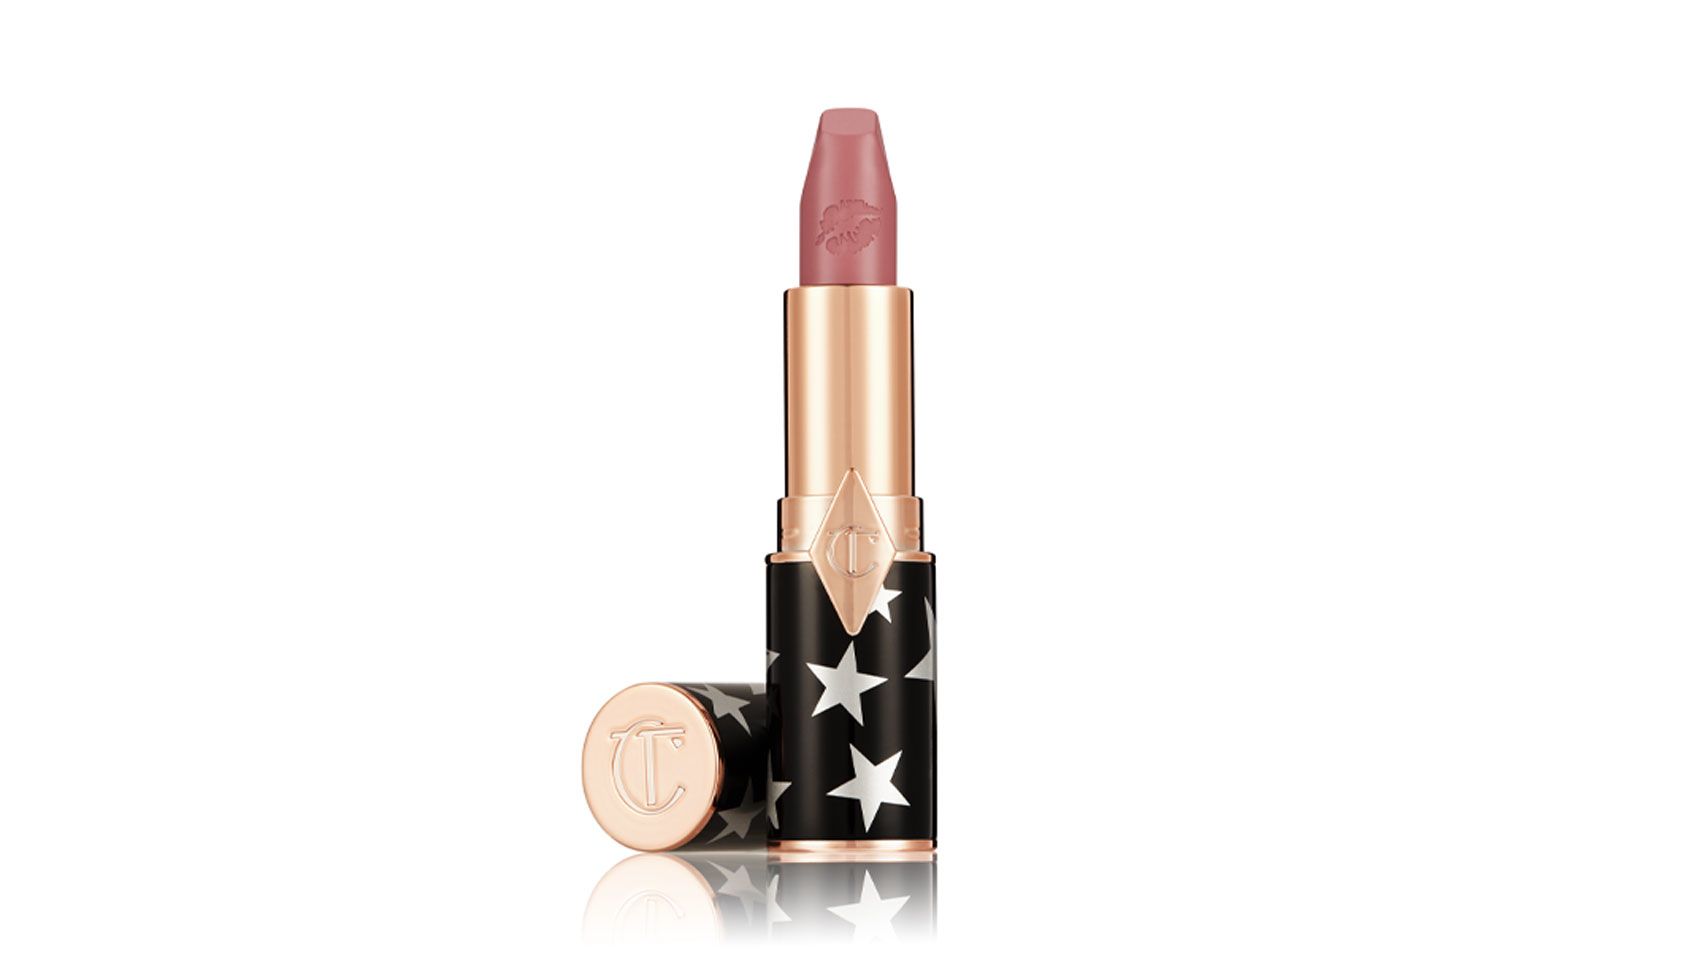 Charlotte Tilbury reveals her new holiday launches and tips on festive  looks